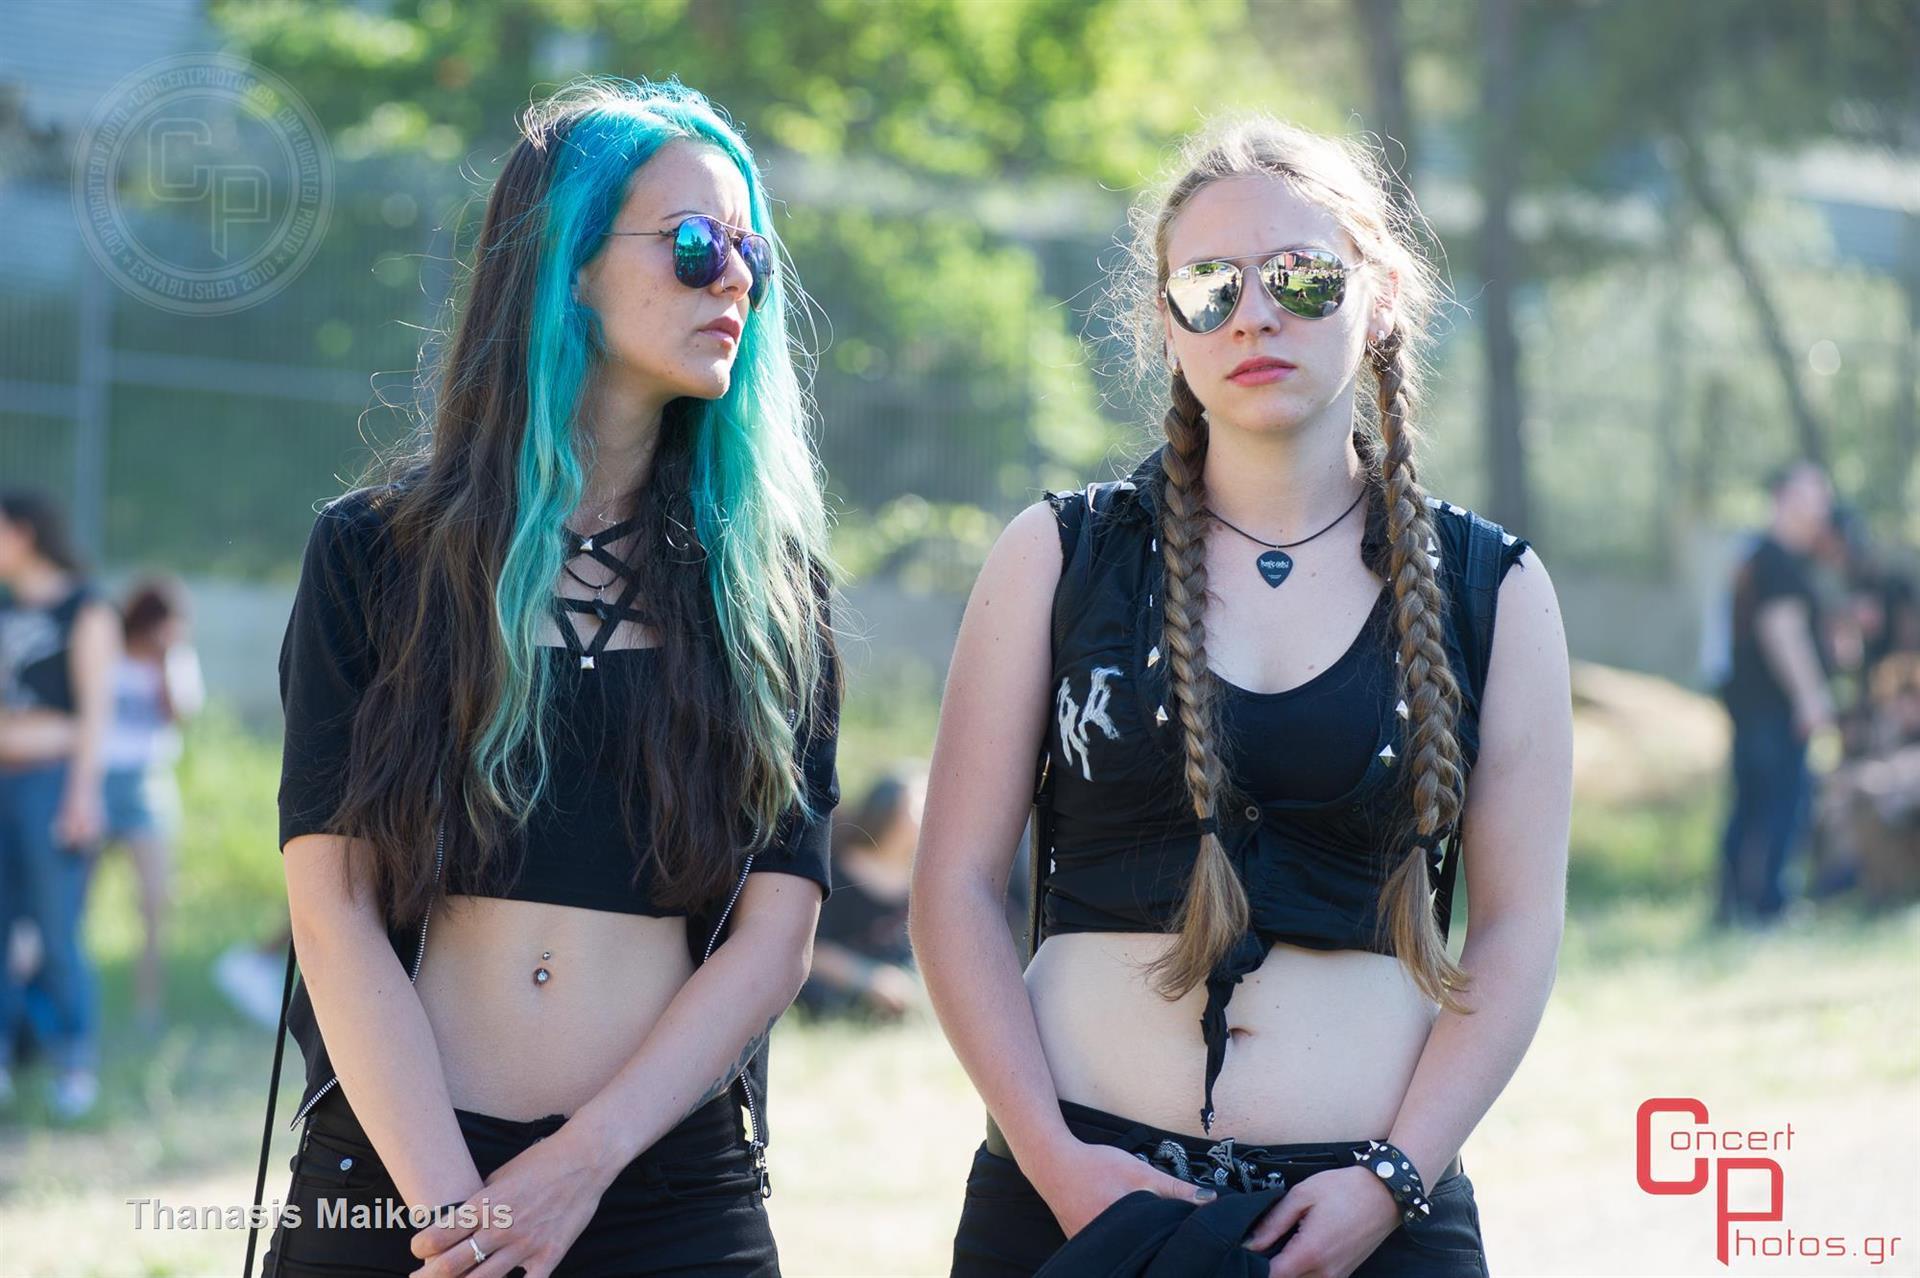 Rockwave 2015 - Day 3-Rockwave 2015 - Day 3 photographer: Thanasis Maikousis - ConcertPhotos - 20150704_1632_10